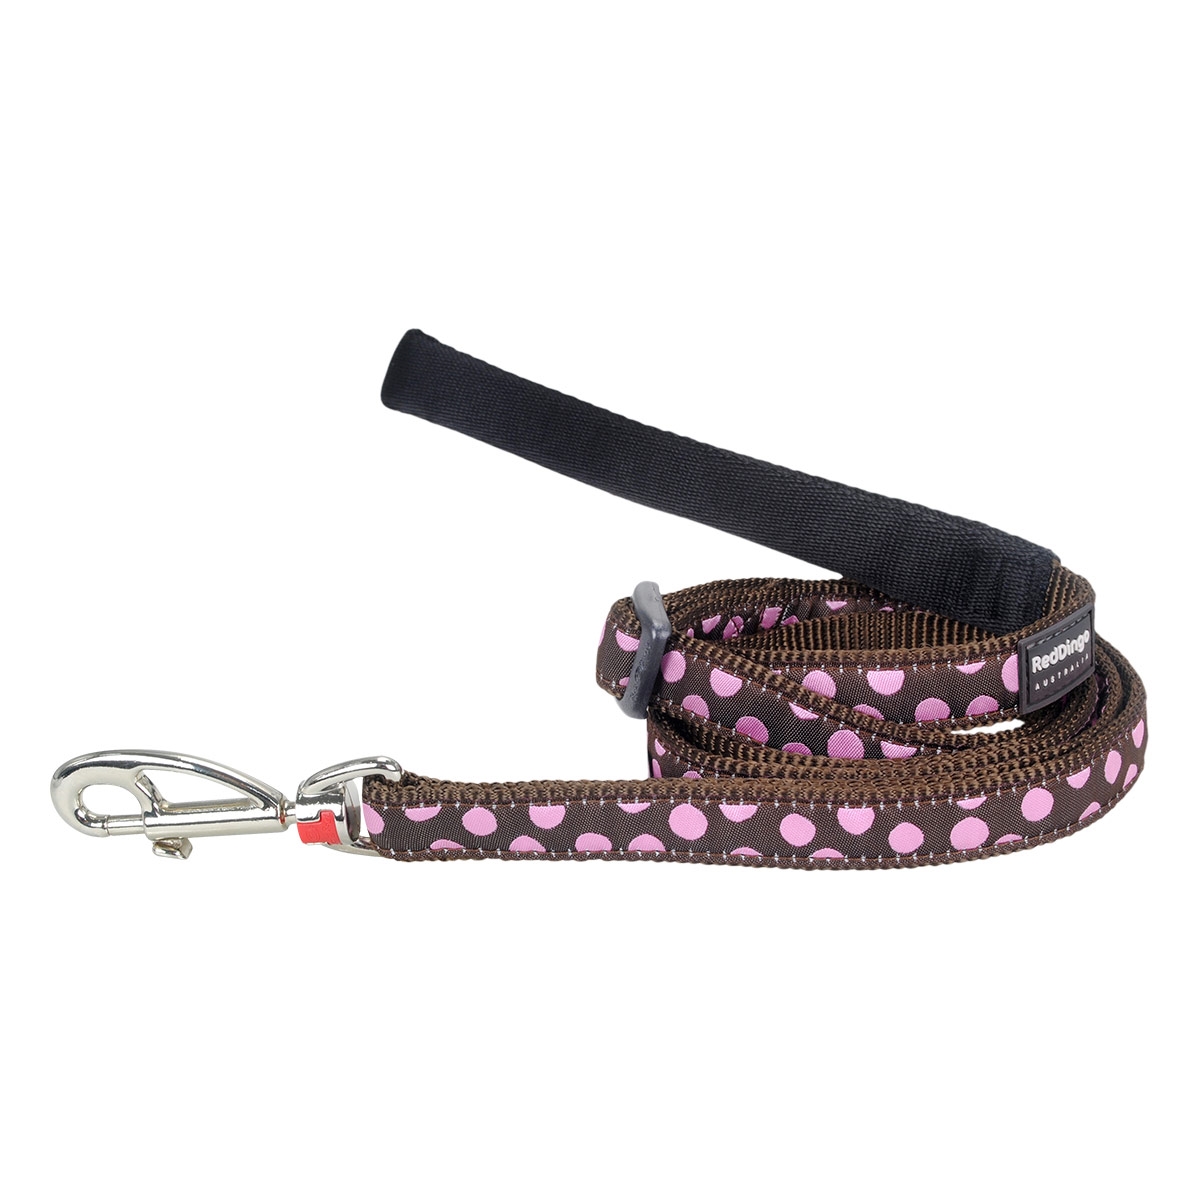 Picture of Red Dingo L6-S1-BR-15 Dog Lead Design Pink Spots on Brown - Small 6ft